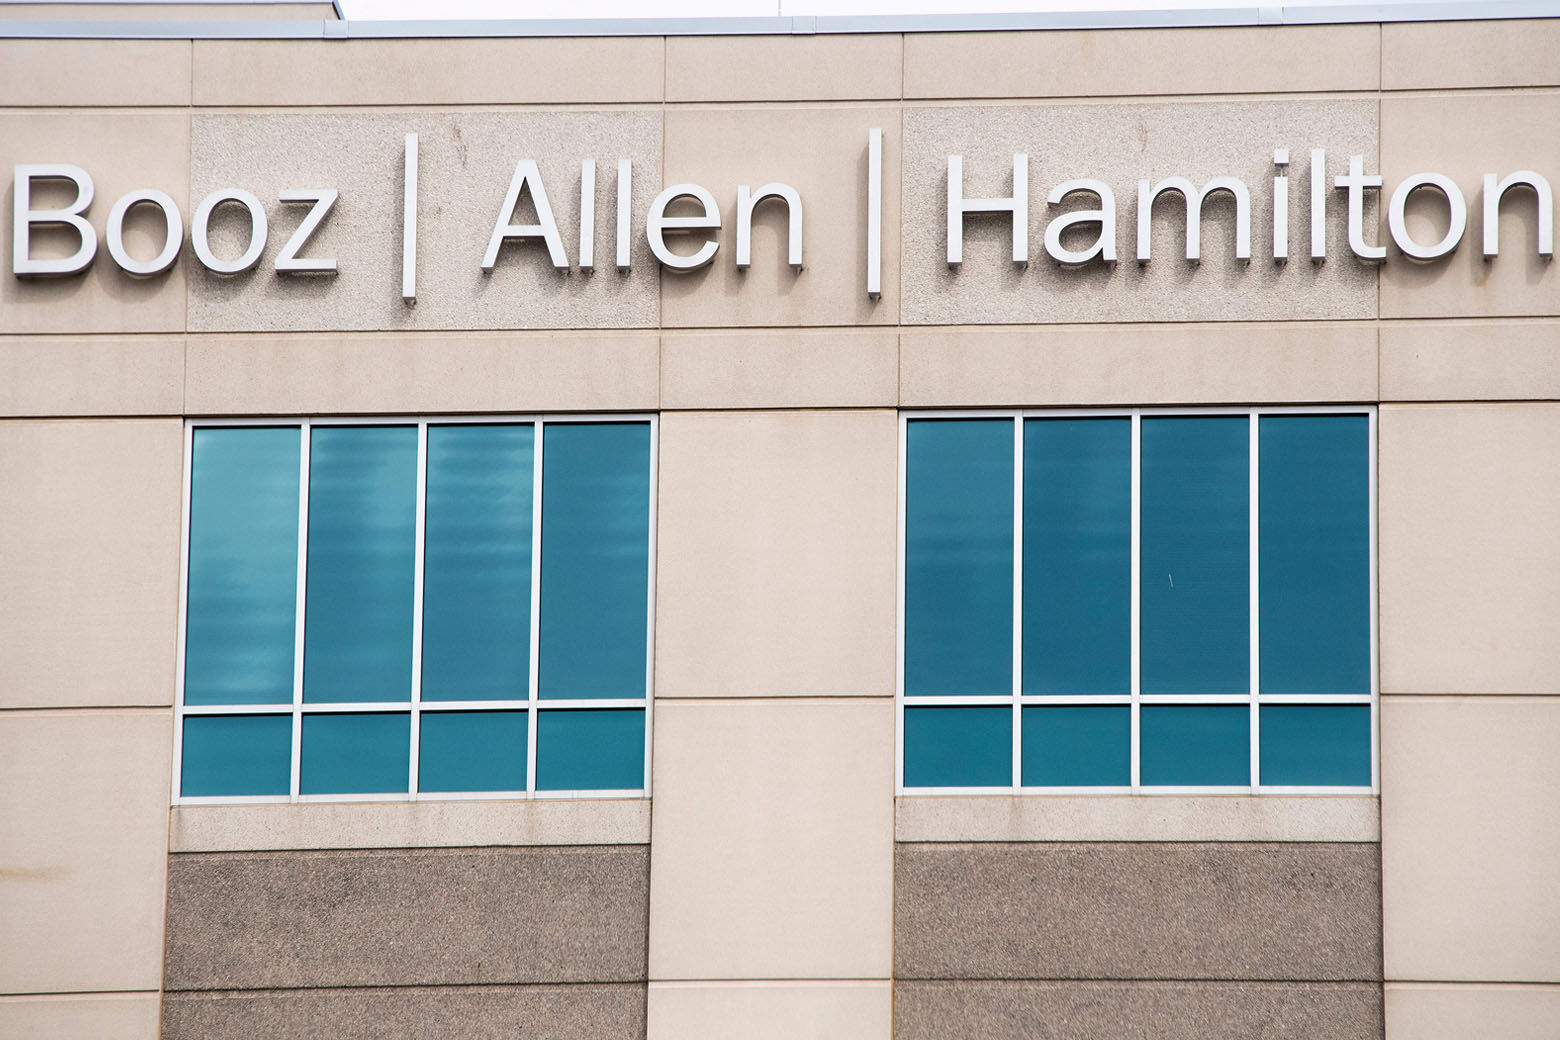 Booz Allen Hamilton headcount grows by hundreds on acquisition, strong